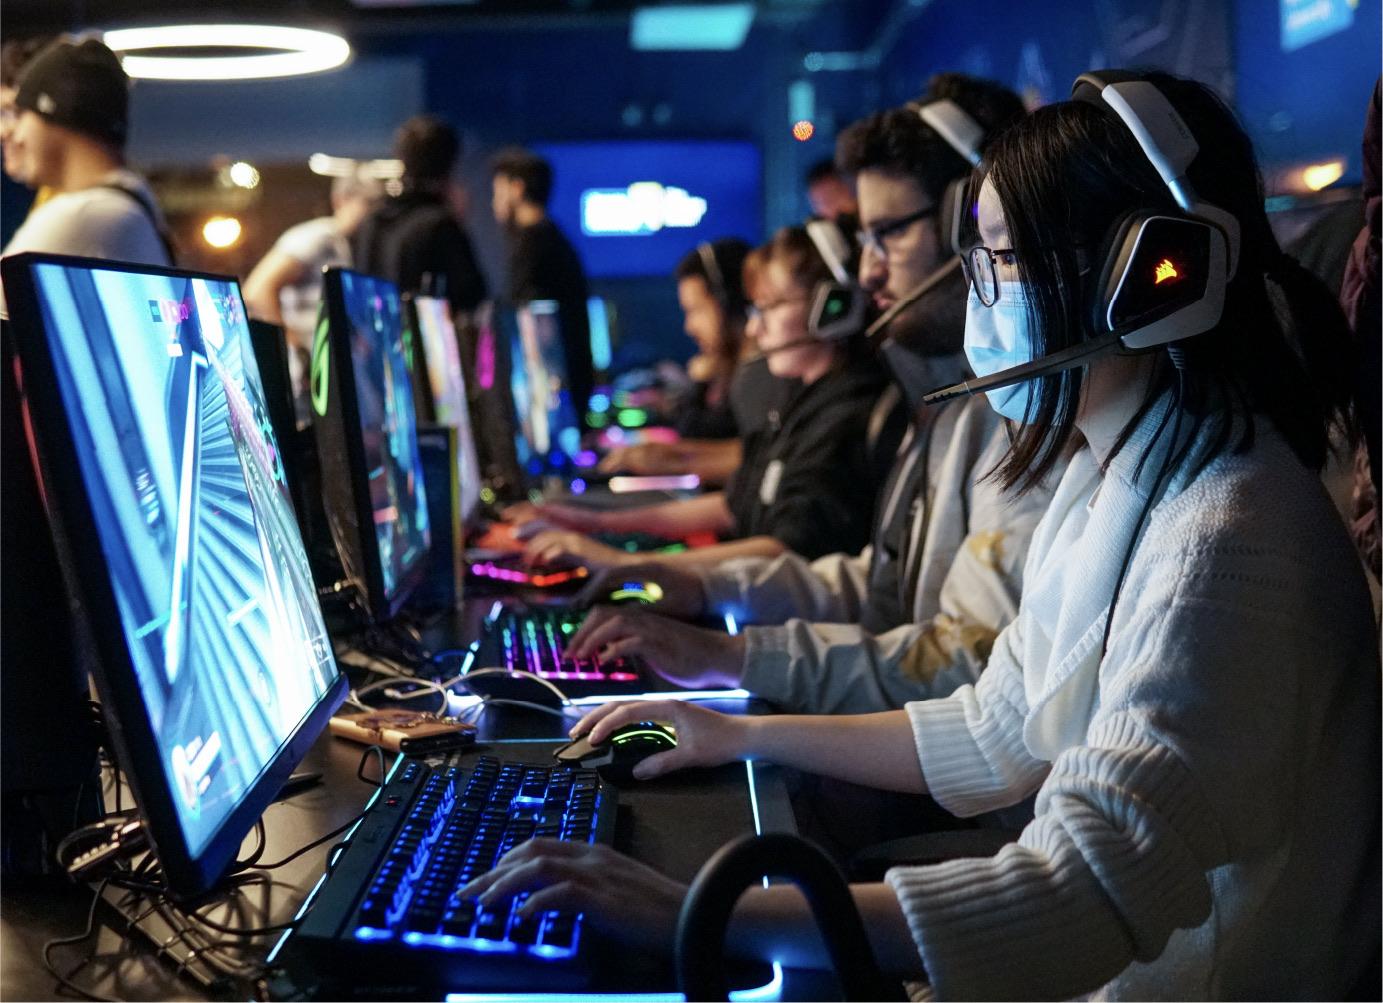 Students playing video games on computers with colourful keyboards and gaming headphones.